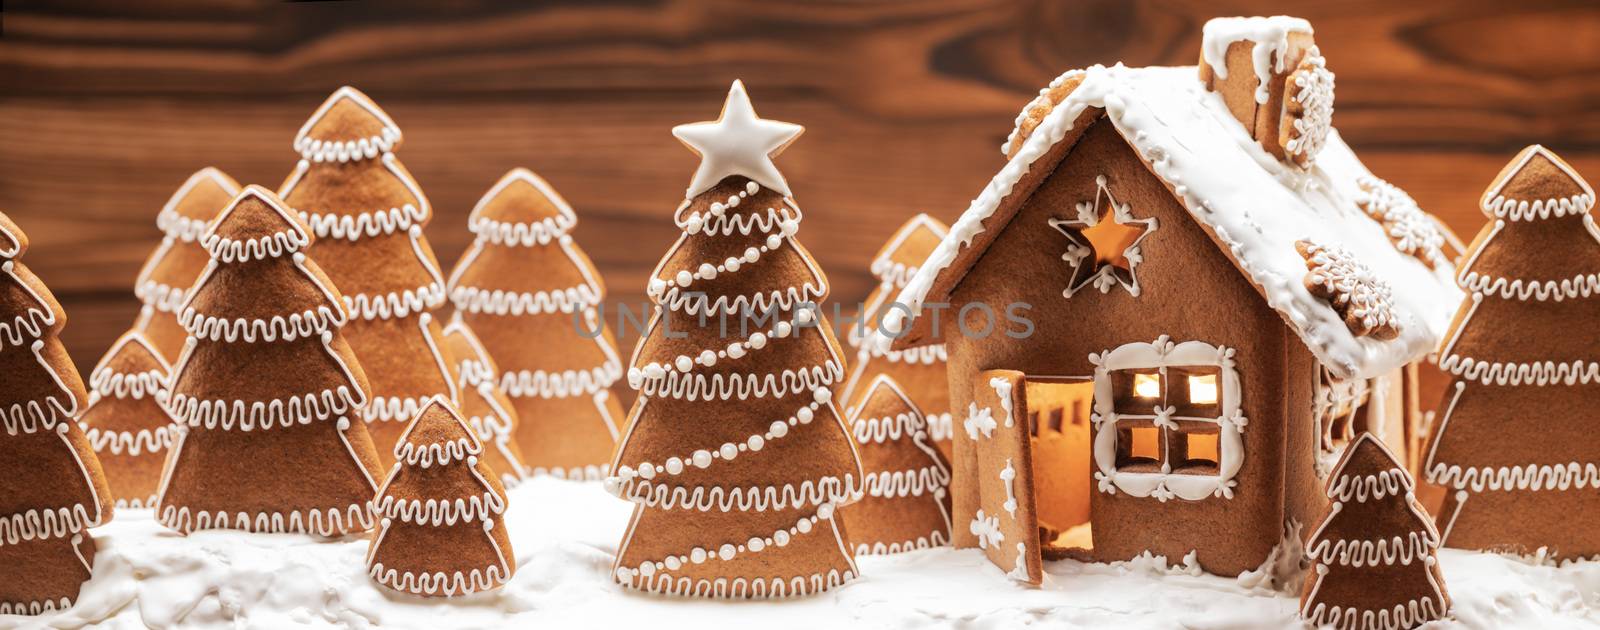 Gingerbread house and trees by Yellowj